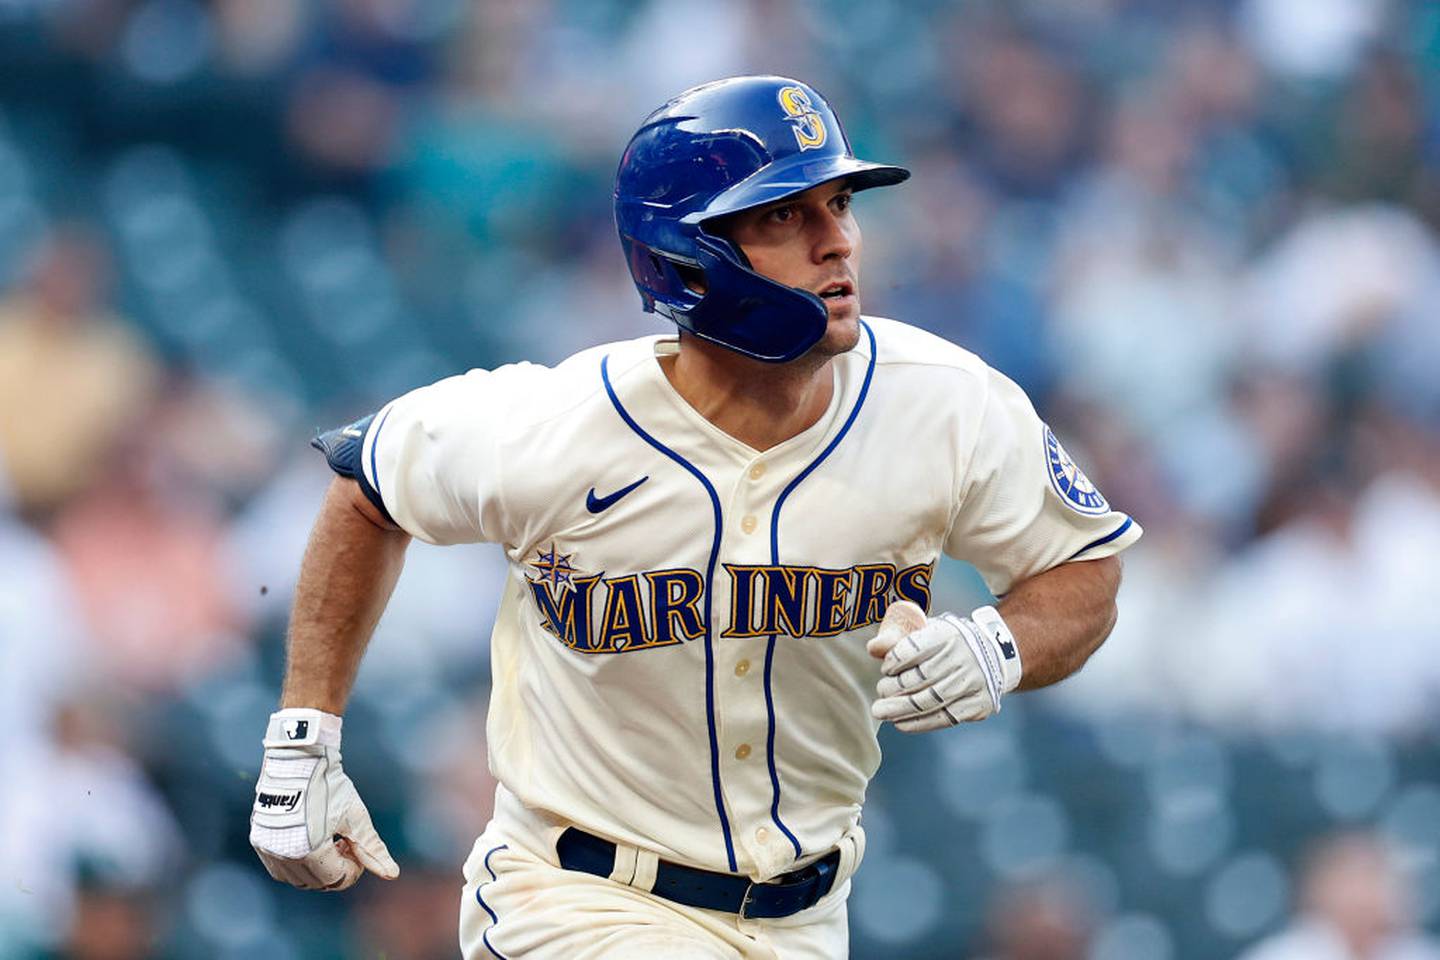 SEATTLE, WASHINGTON - OCTOBER 02: Adam Frazier #26 of the Seattle Mariners runs to first base during the ninth inning against the Oakland Athletics at T-Mobile Park on October 02, 2022 in Seattle, Washington.